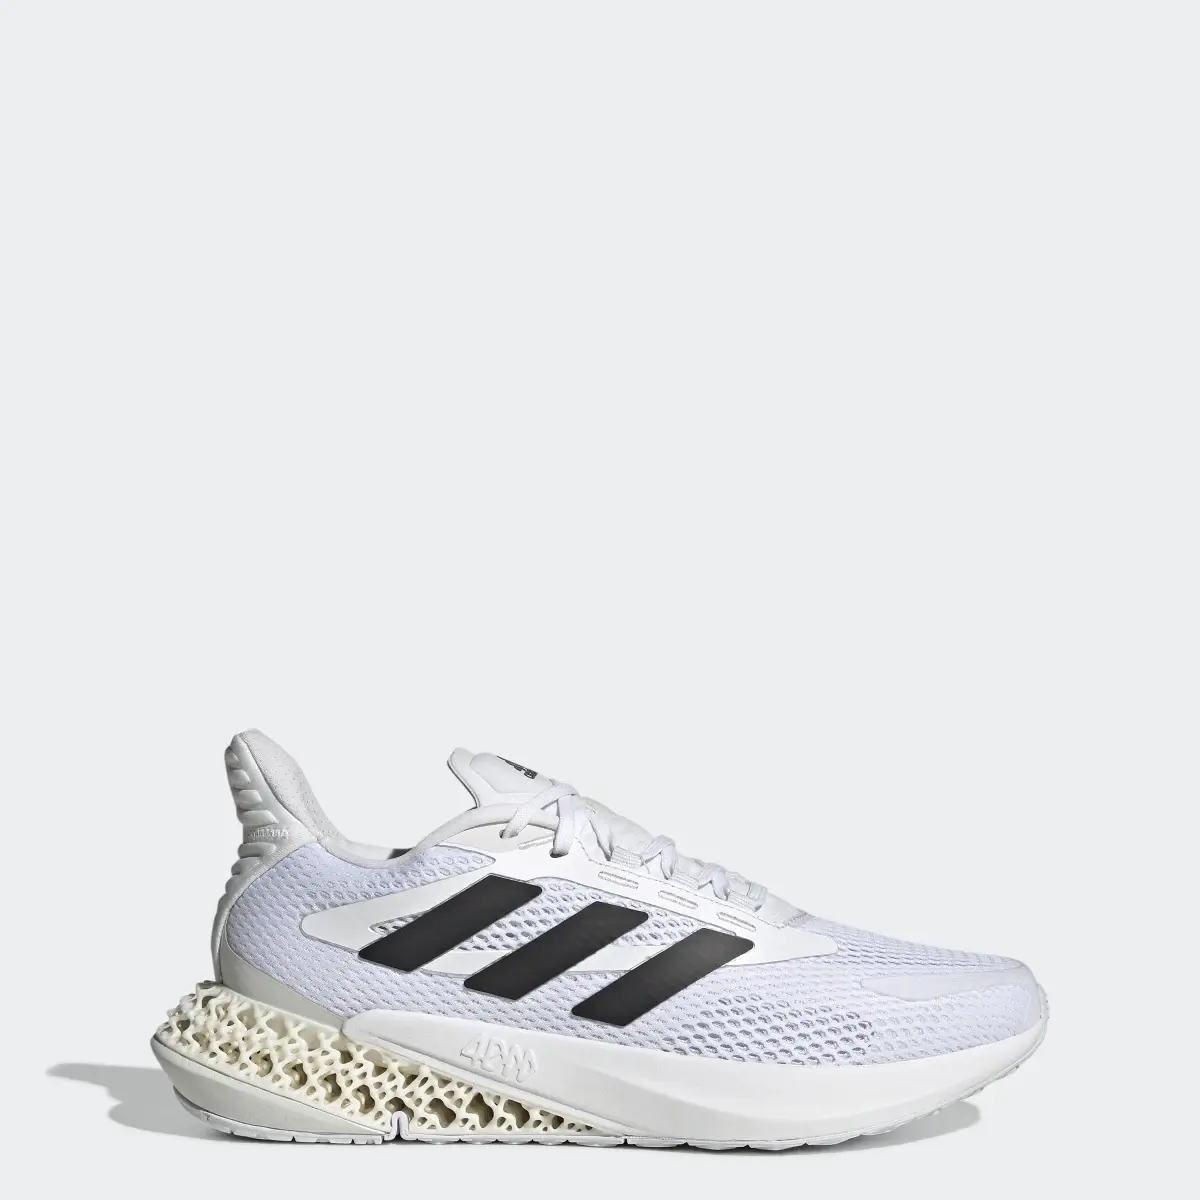 Adidas 4DFWD Pulse Shoes. 1